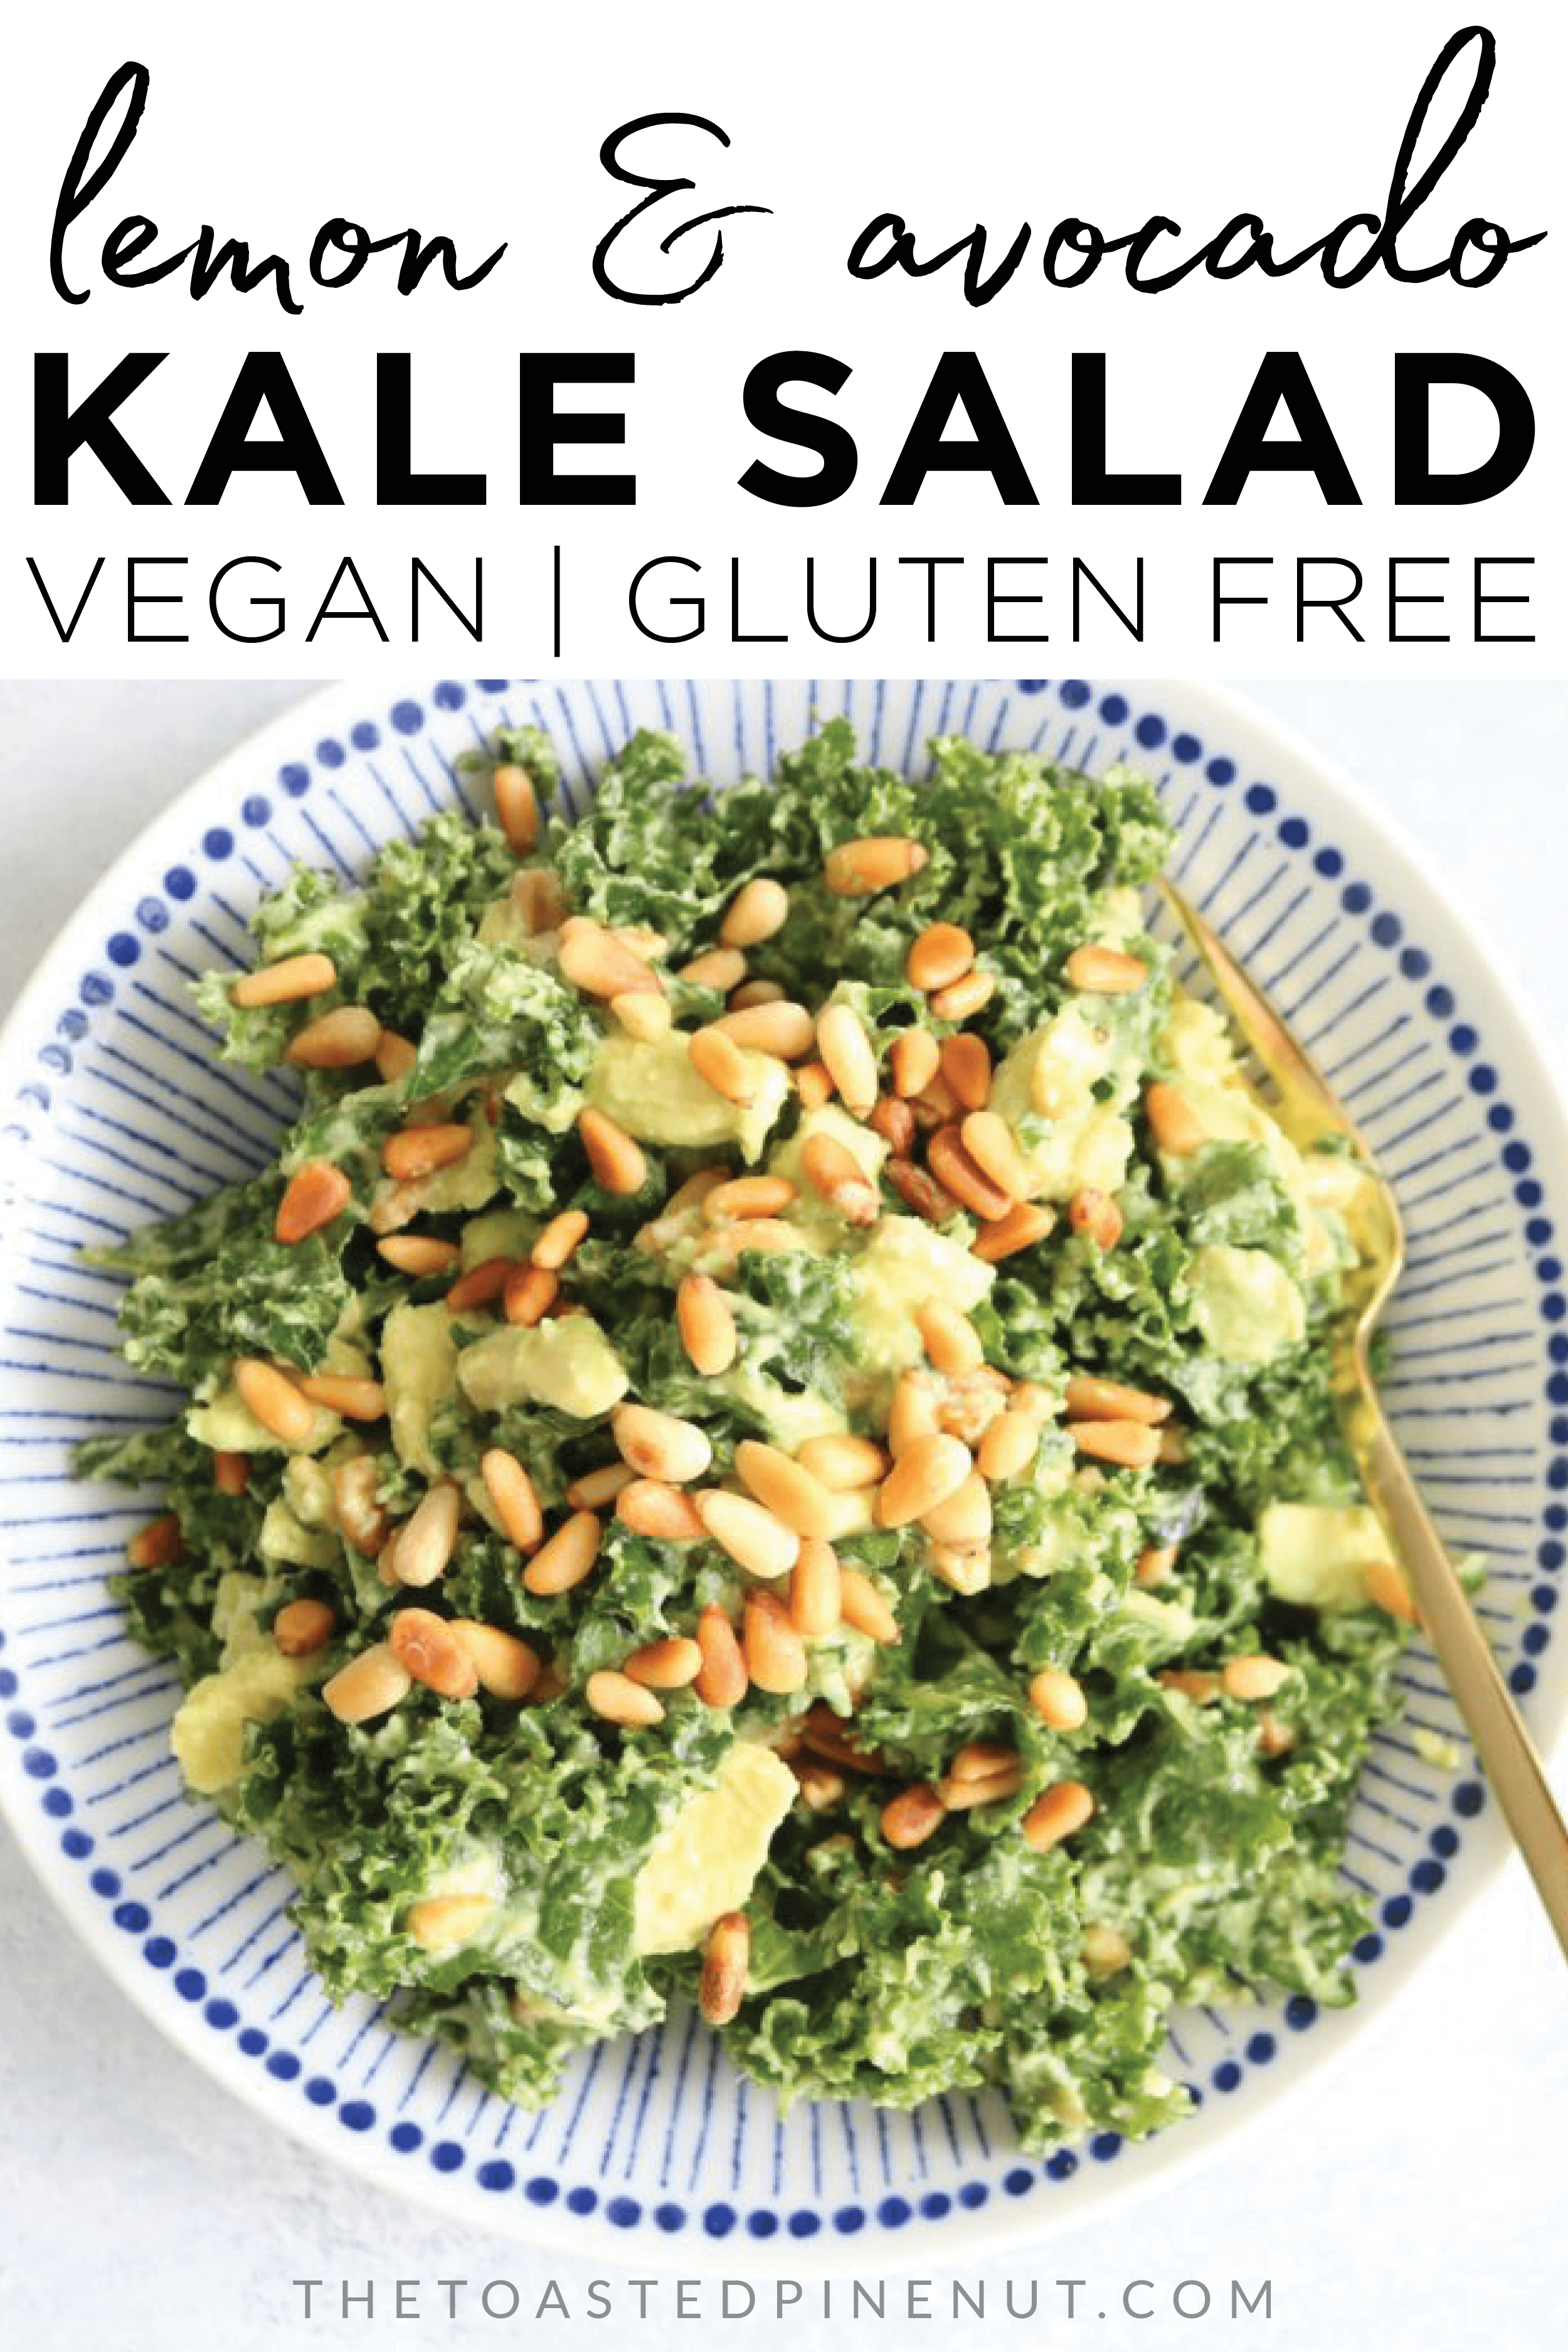 The best kale salad ever!! The avocado, lemon, and pine nuts add such a nice touch and it's so easy! I'm telling you, this is your new favorite salad! thetoastedpinenut.com #salad #lowcarb #glutenfree #paleo #vegan #kale #kalesalad #avocado #avocadodressing